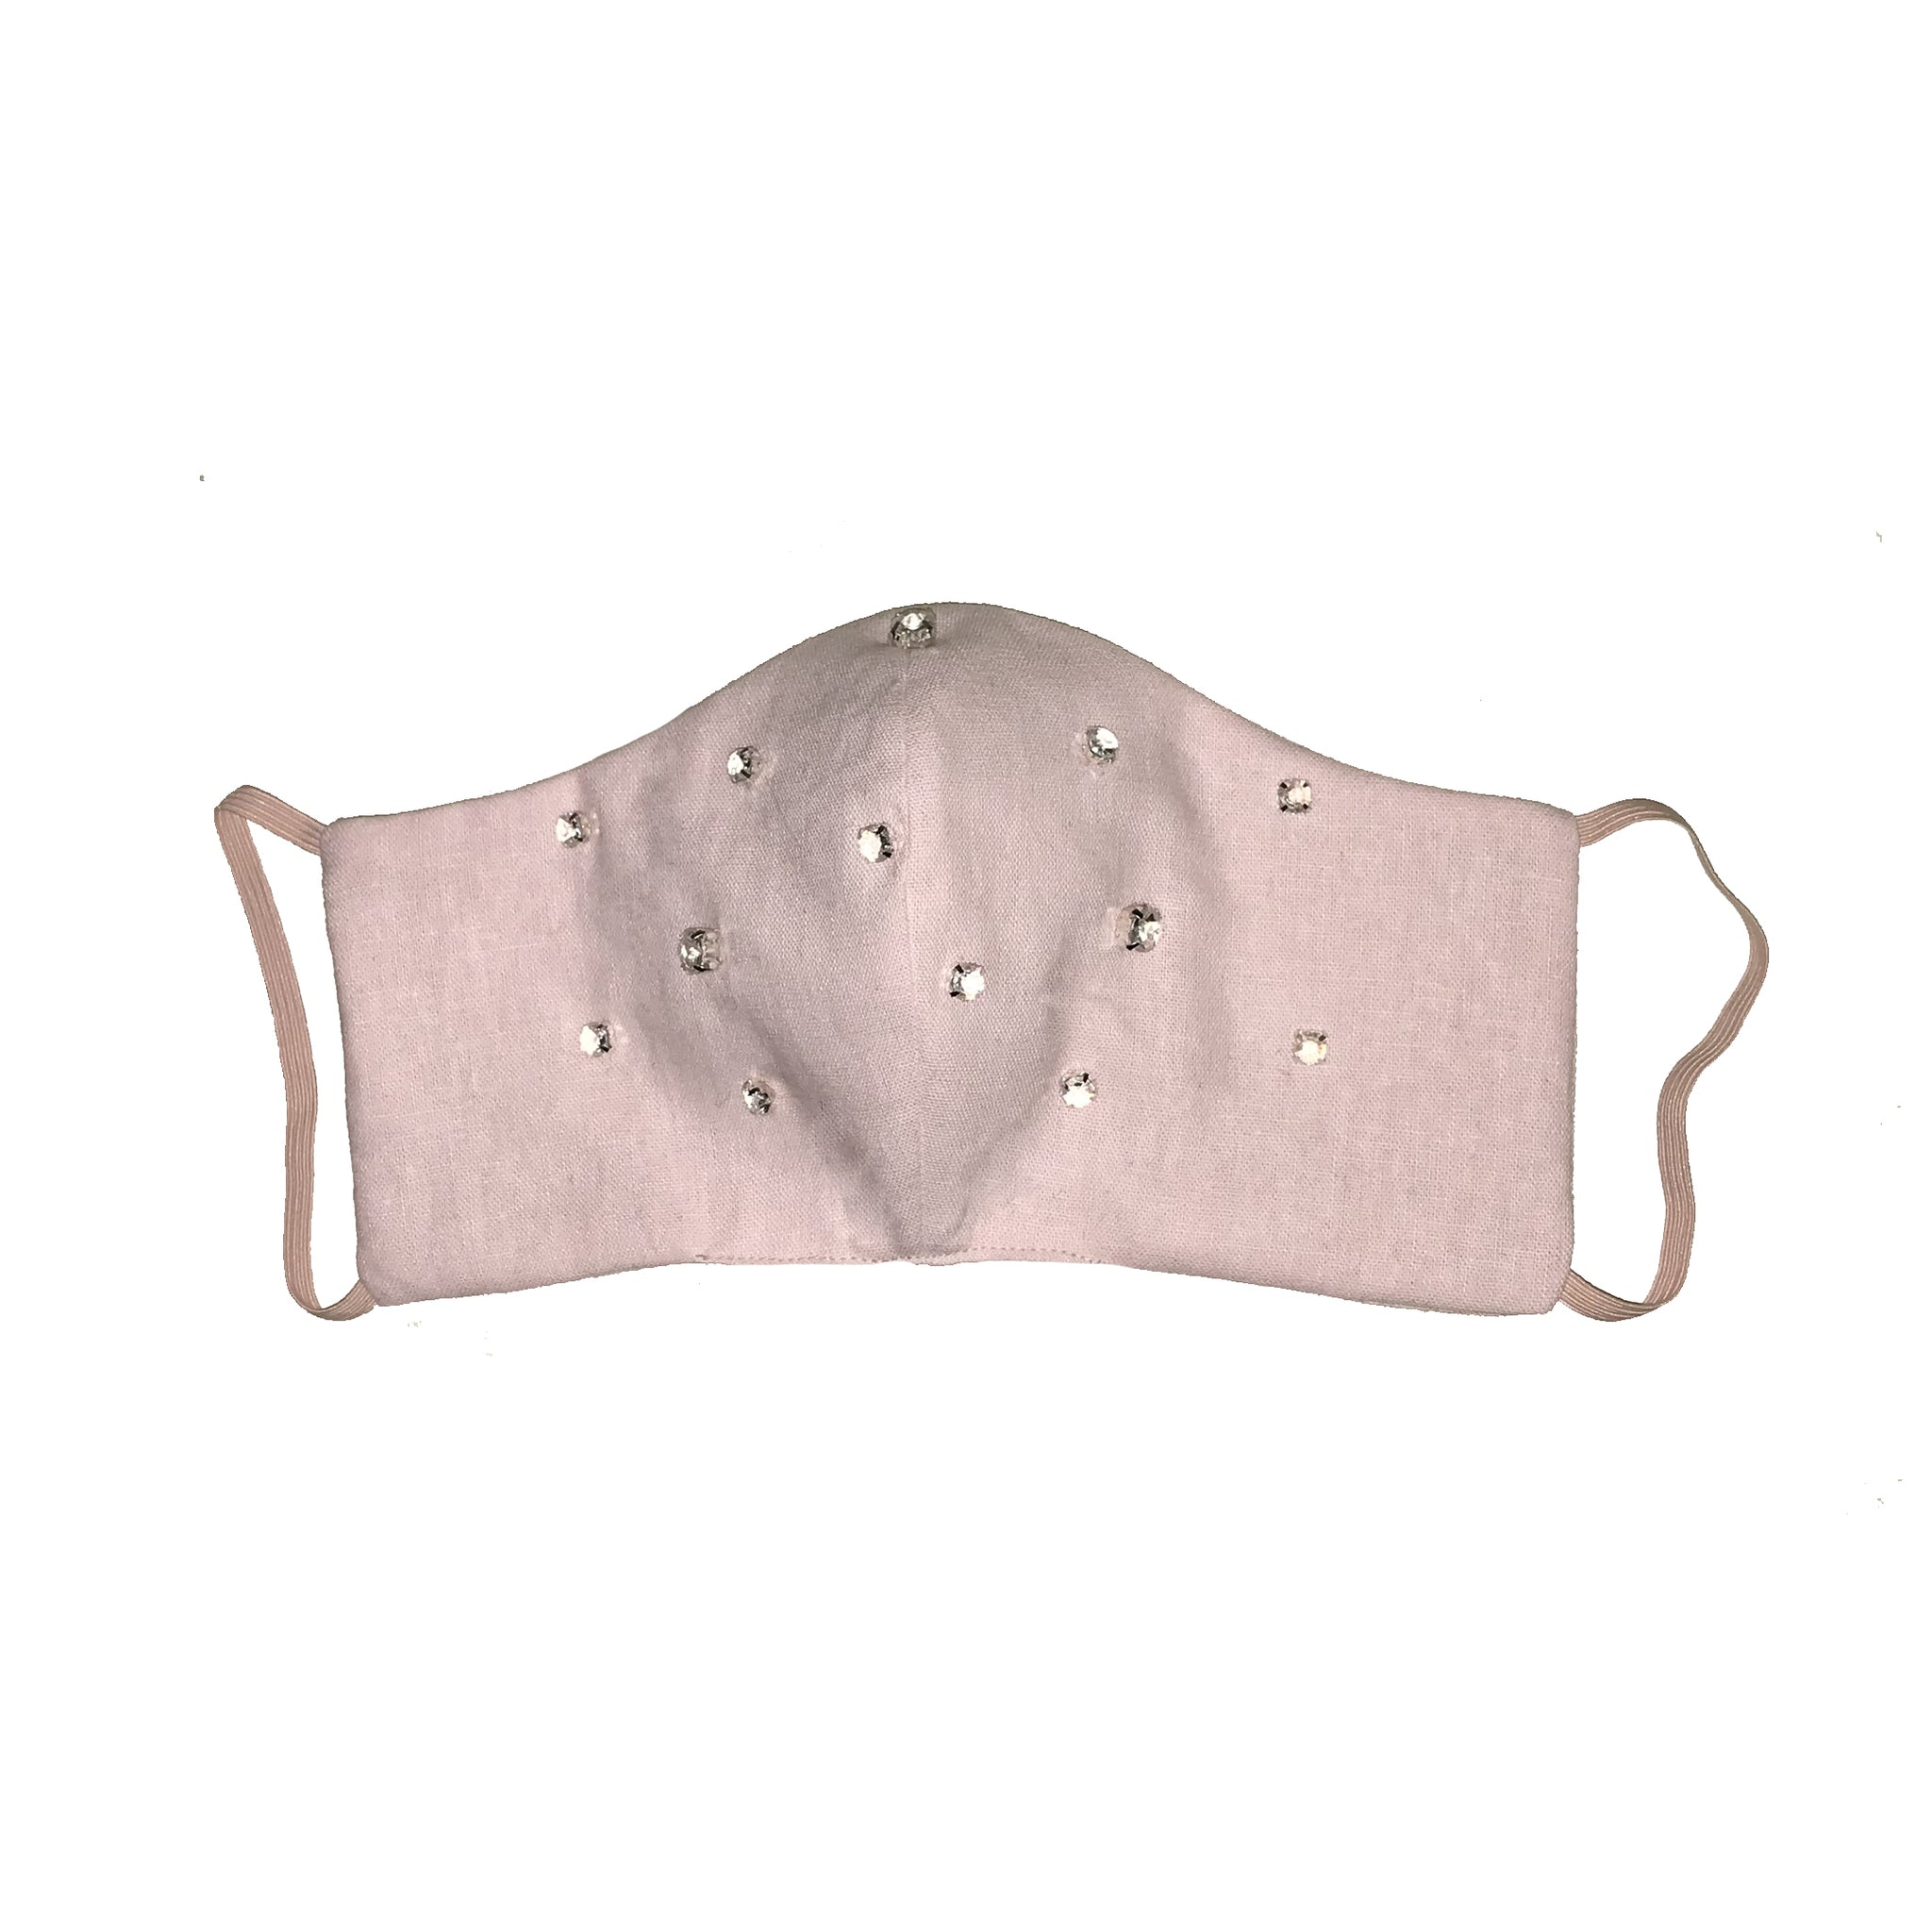 Bejewelled Face Mask Pale Pink all over jewel